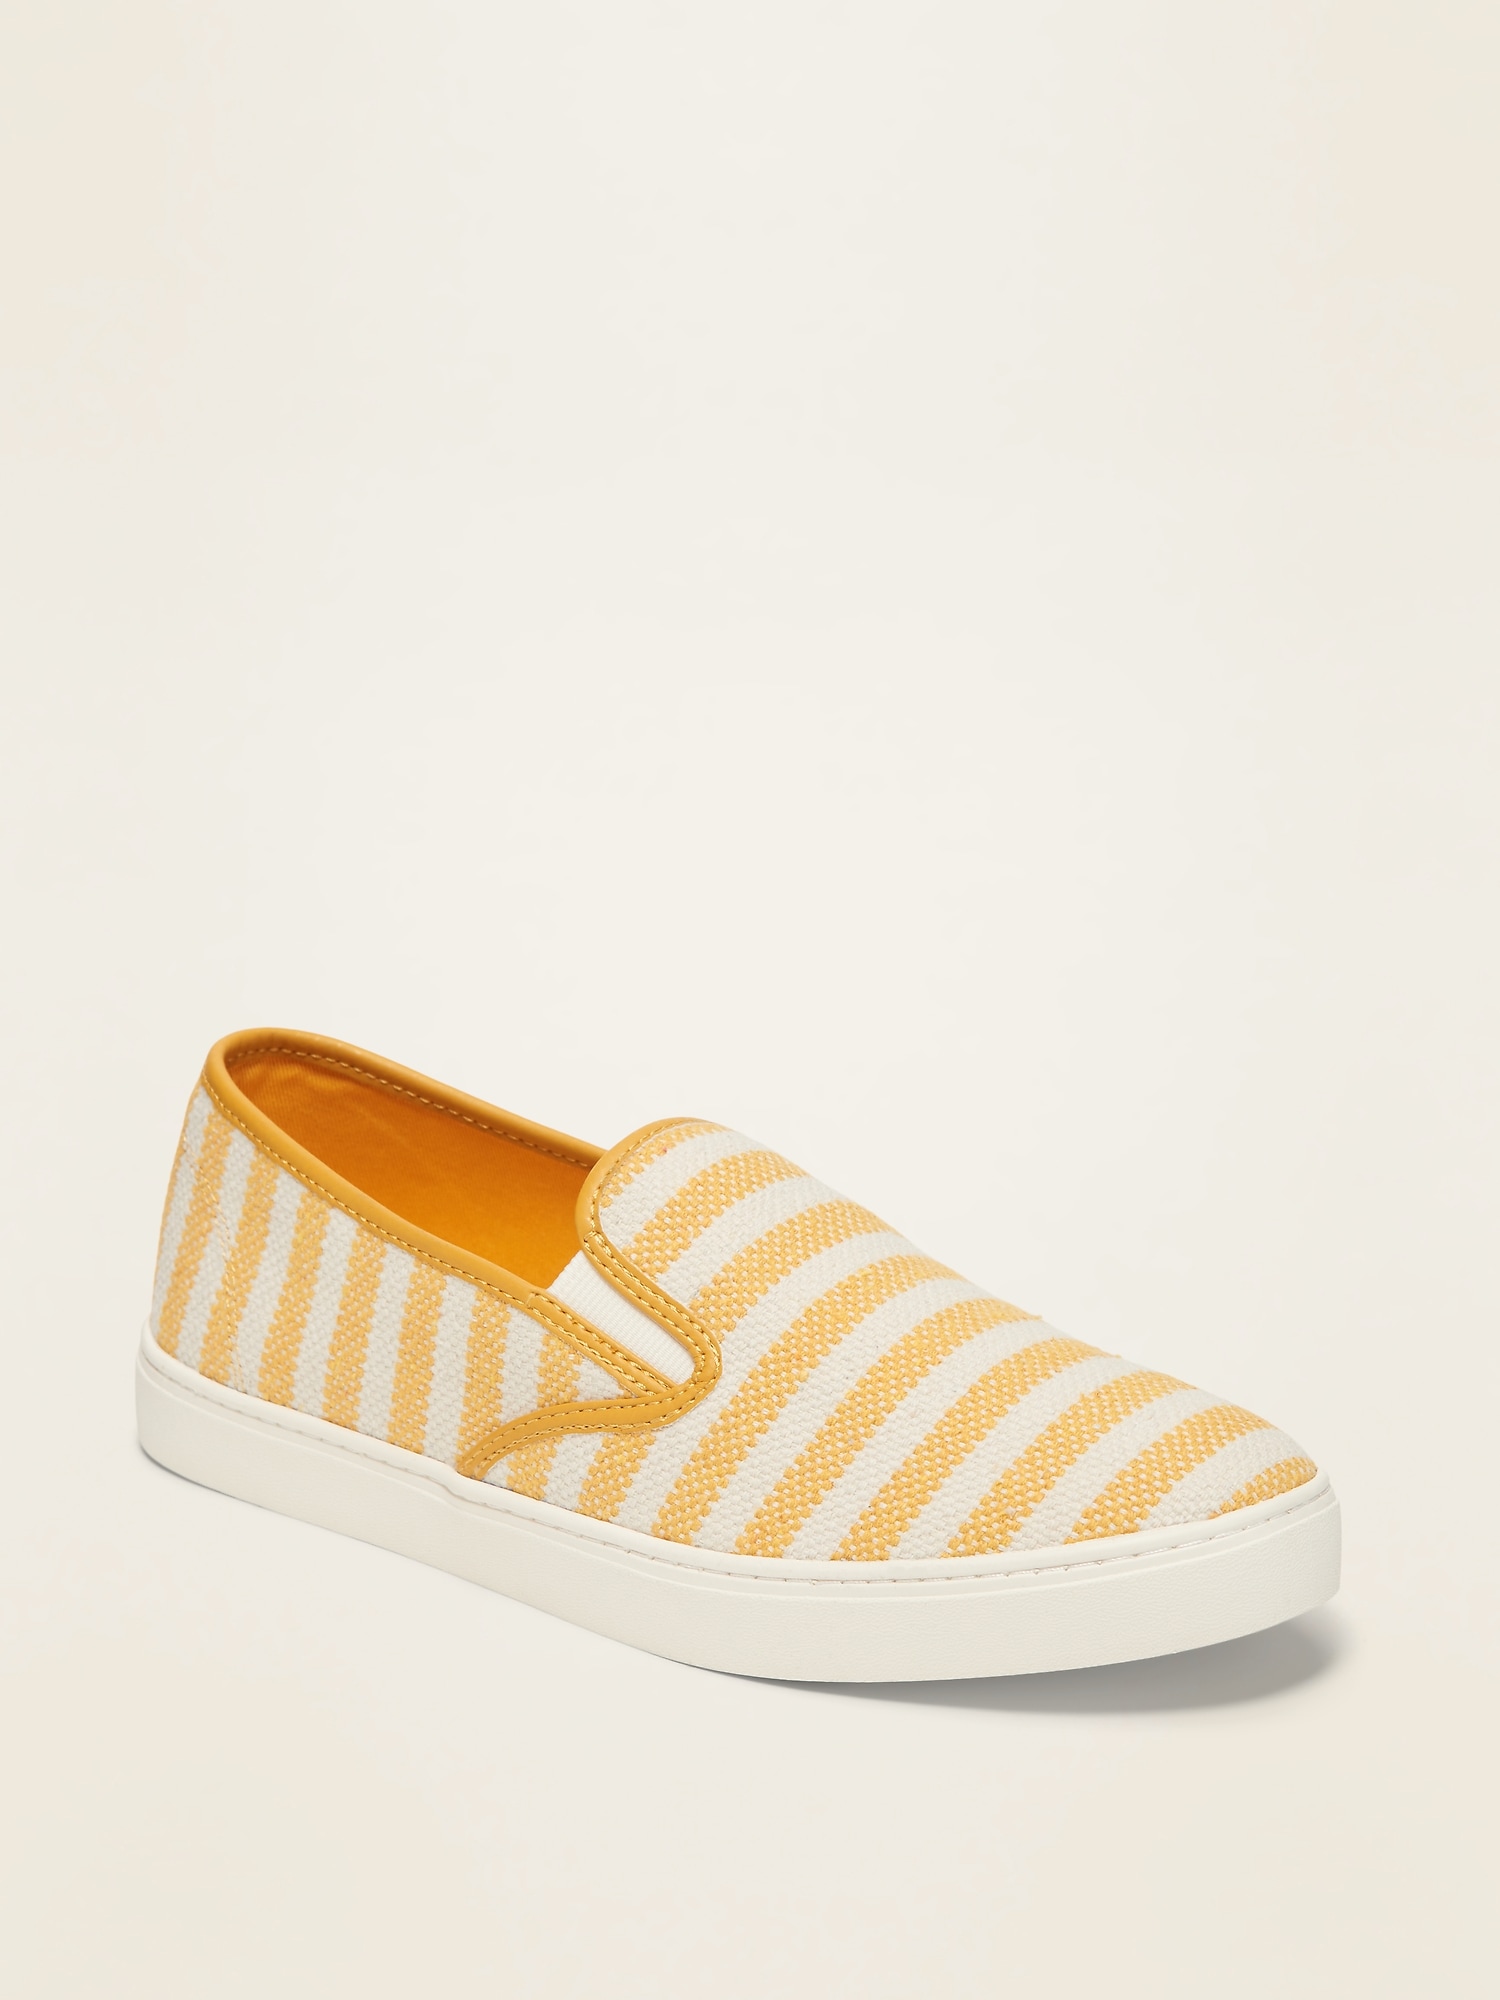 Striped Textured Slip-Ons for Women 